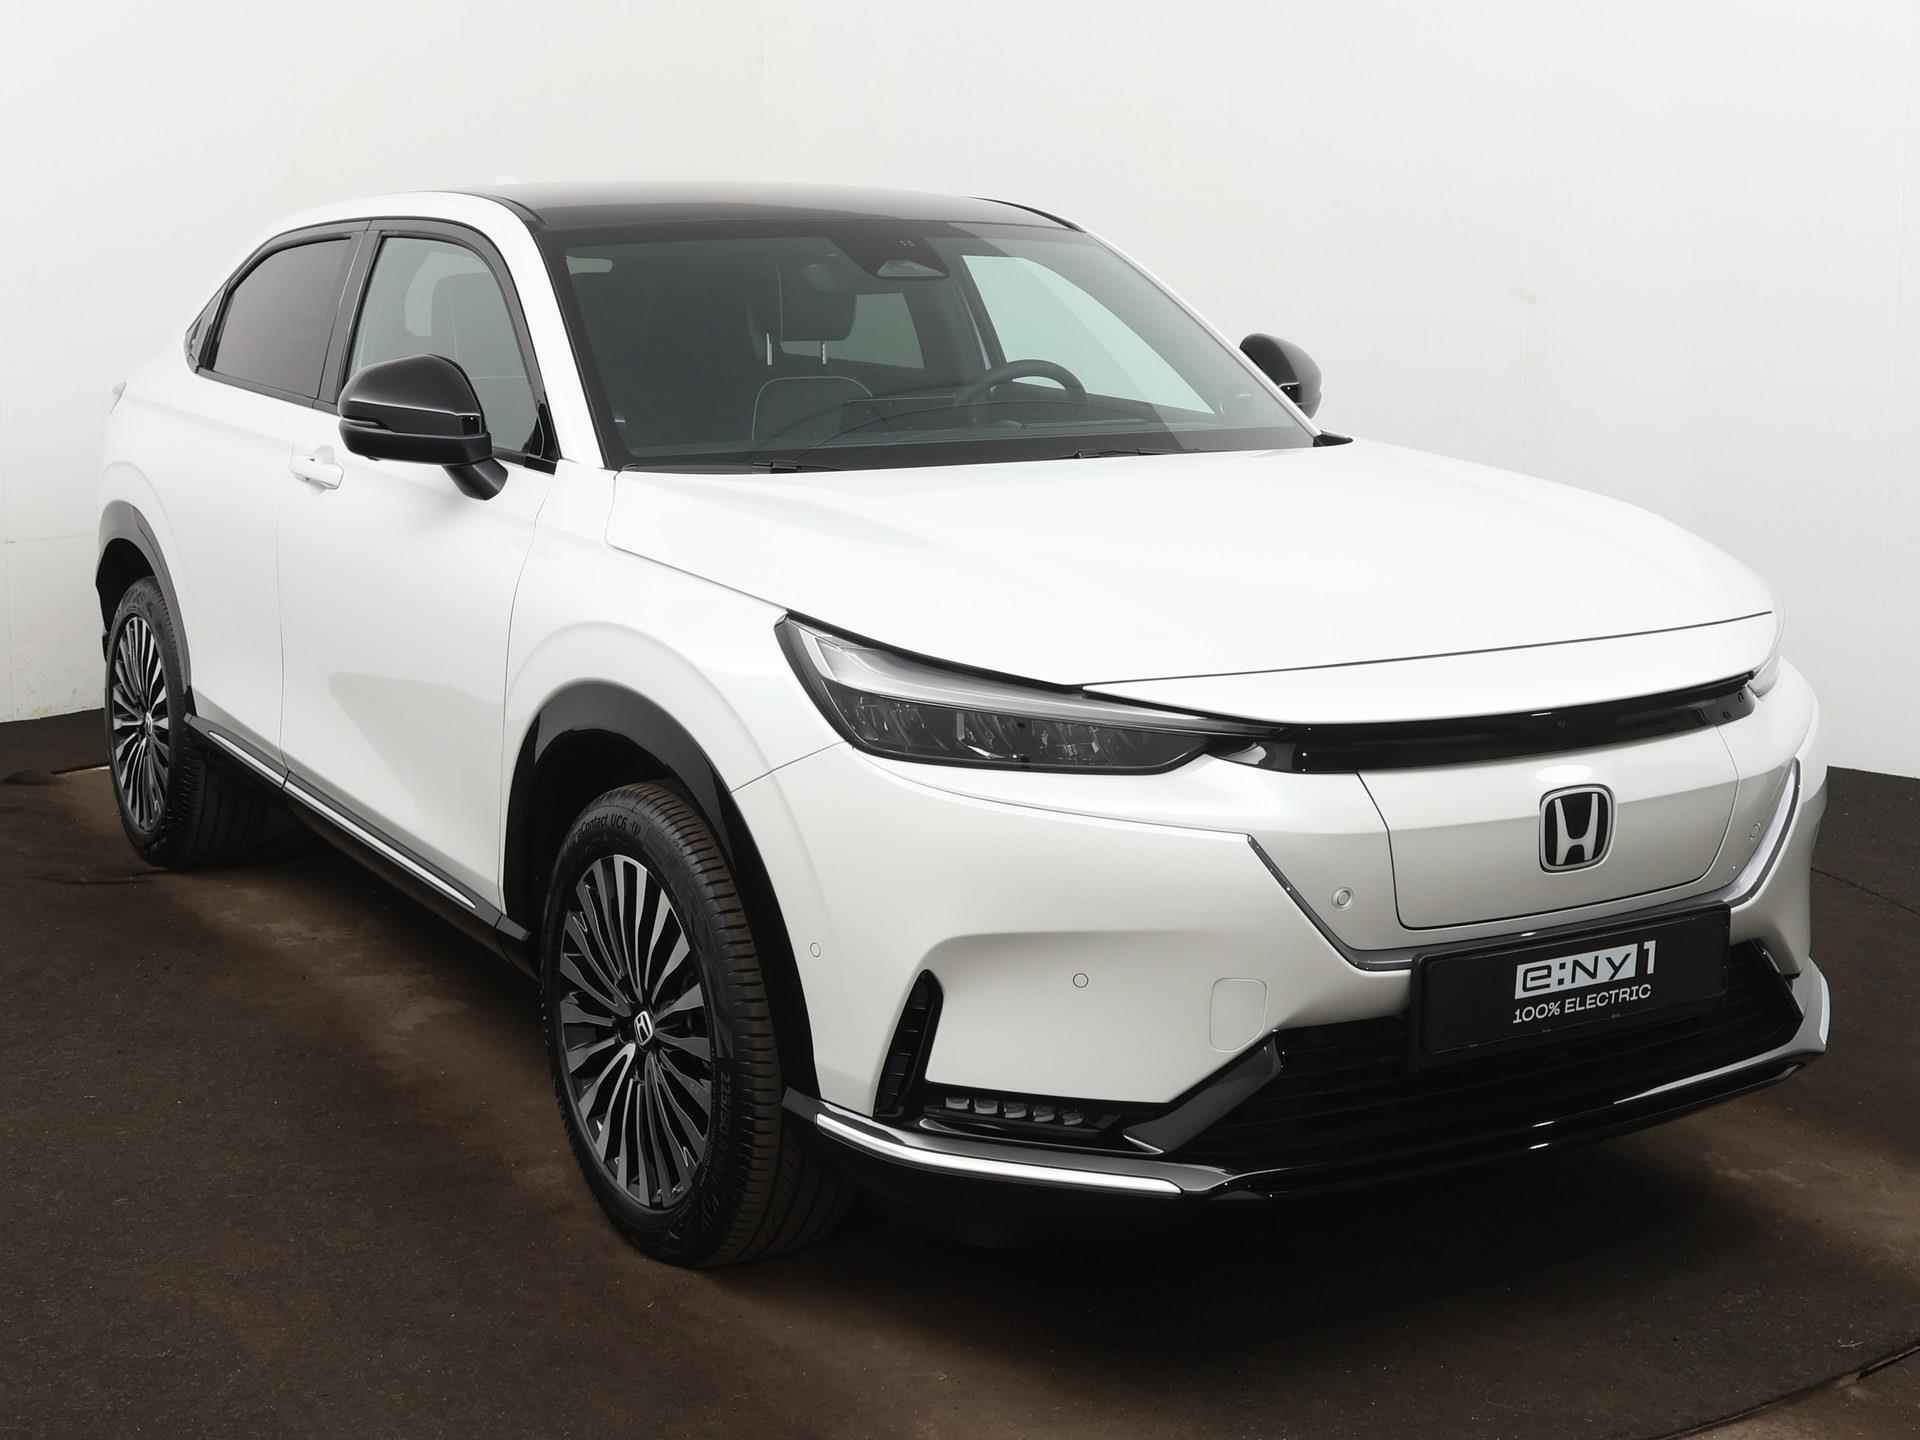 Honda e:Ny1 Limited Edition 69 kWh | Private Lease nu €495,- ! | Incl. €6150,- Outletdeal! | €2950,- SEPP subsidie mogelijk! | Leer | Navigatie | Camera | Adaptive cruise | Keyless | - 6/37